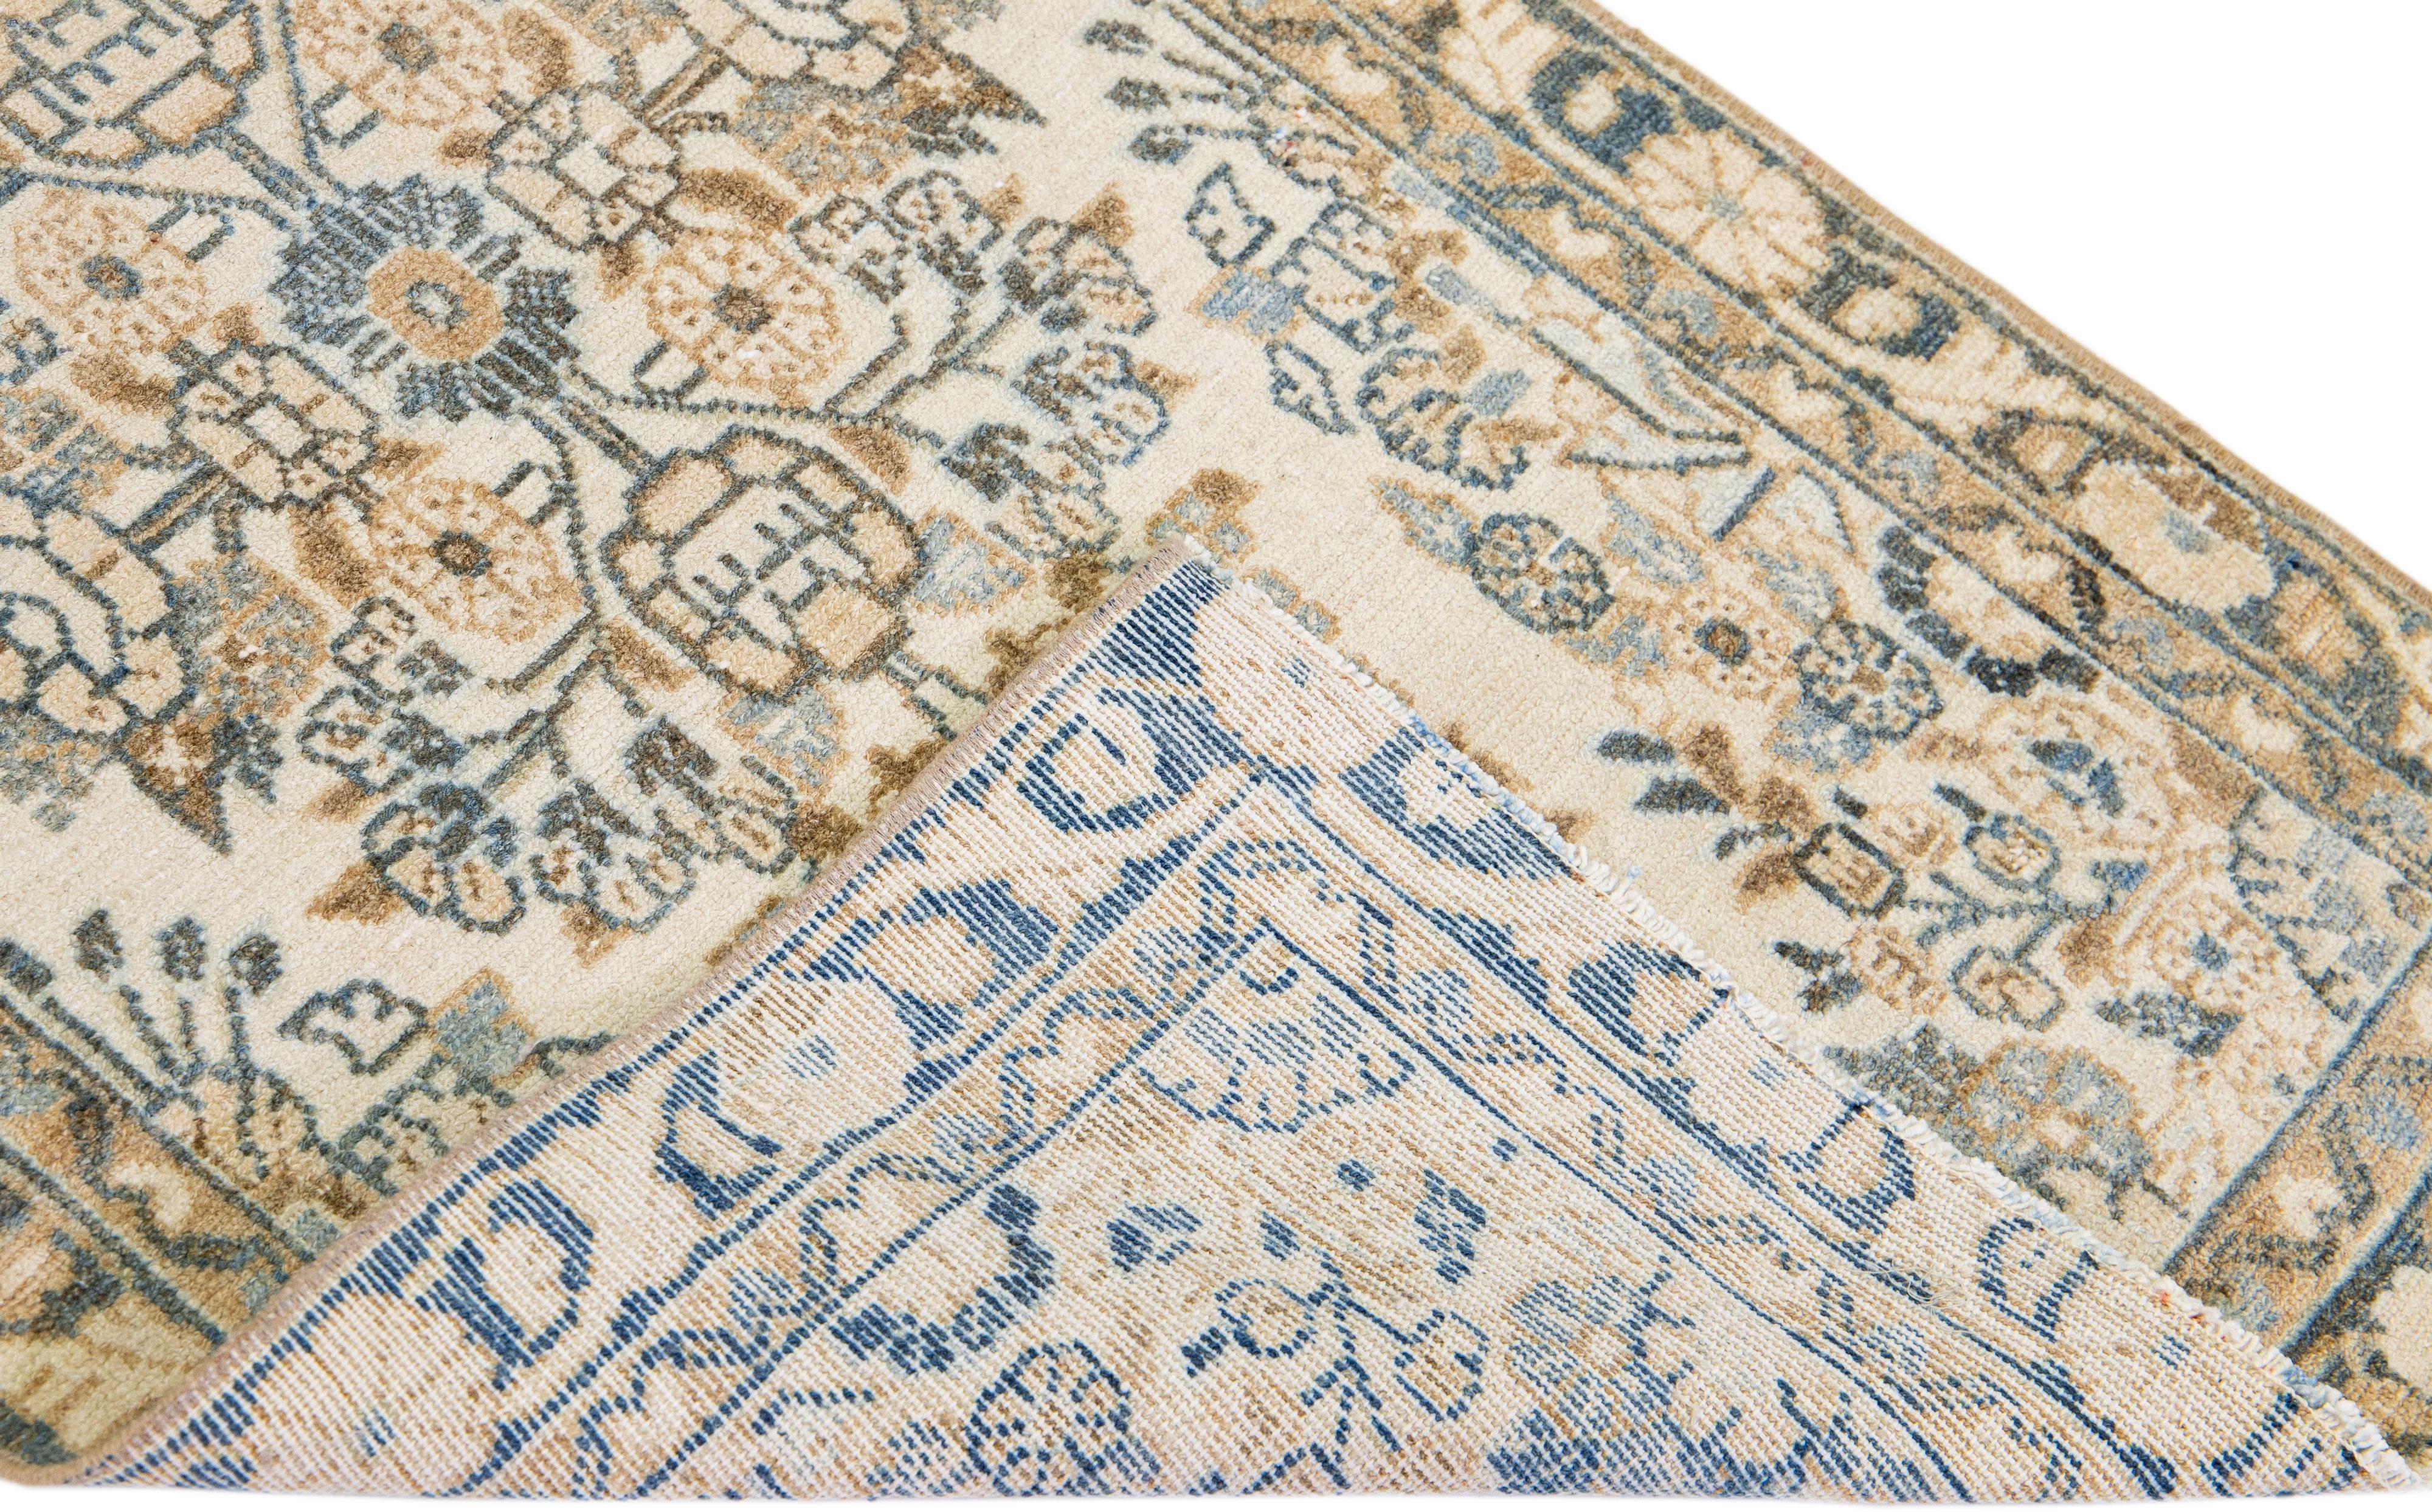 Beautiful antique Persian Heriz long wool runner with a beige field has a brown border and blue accents in a gorgeous all-over medallion floral design.

This rug measures 2'4